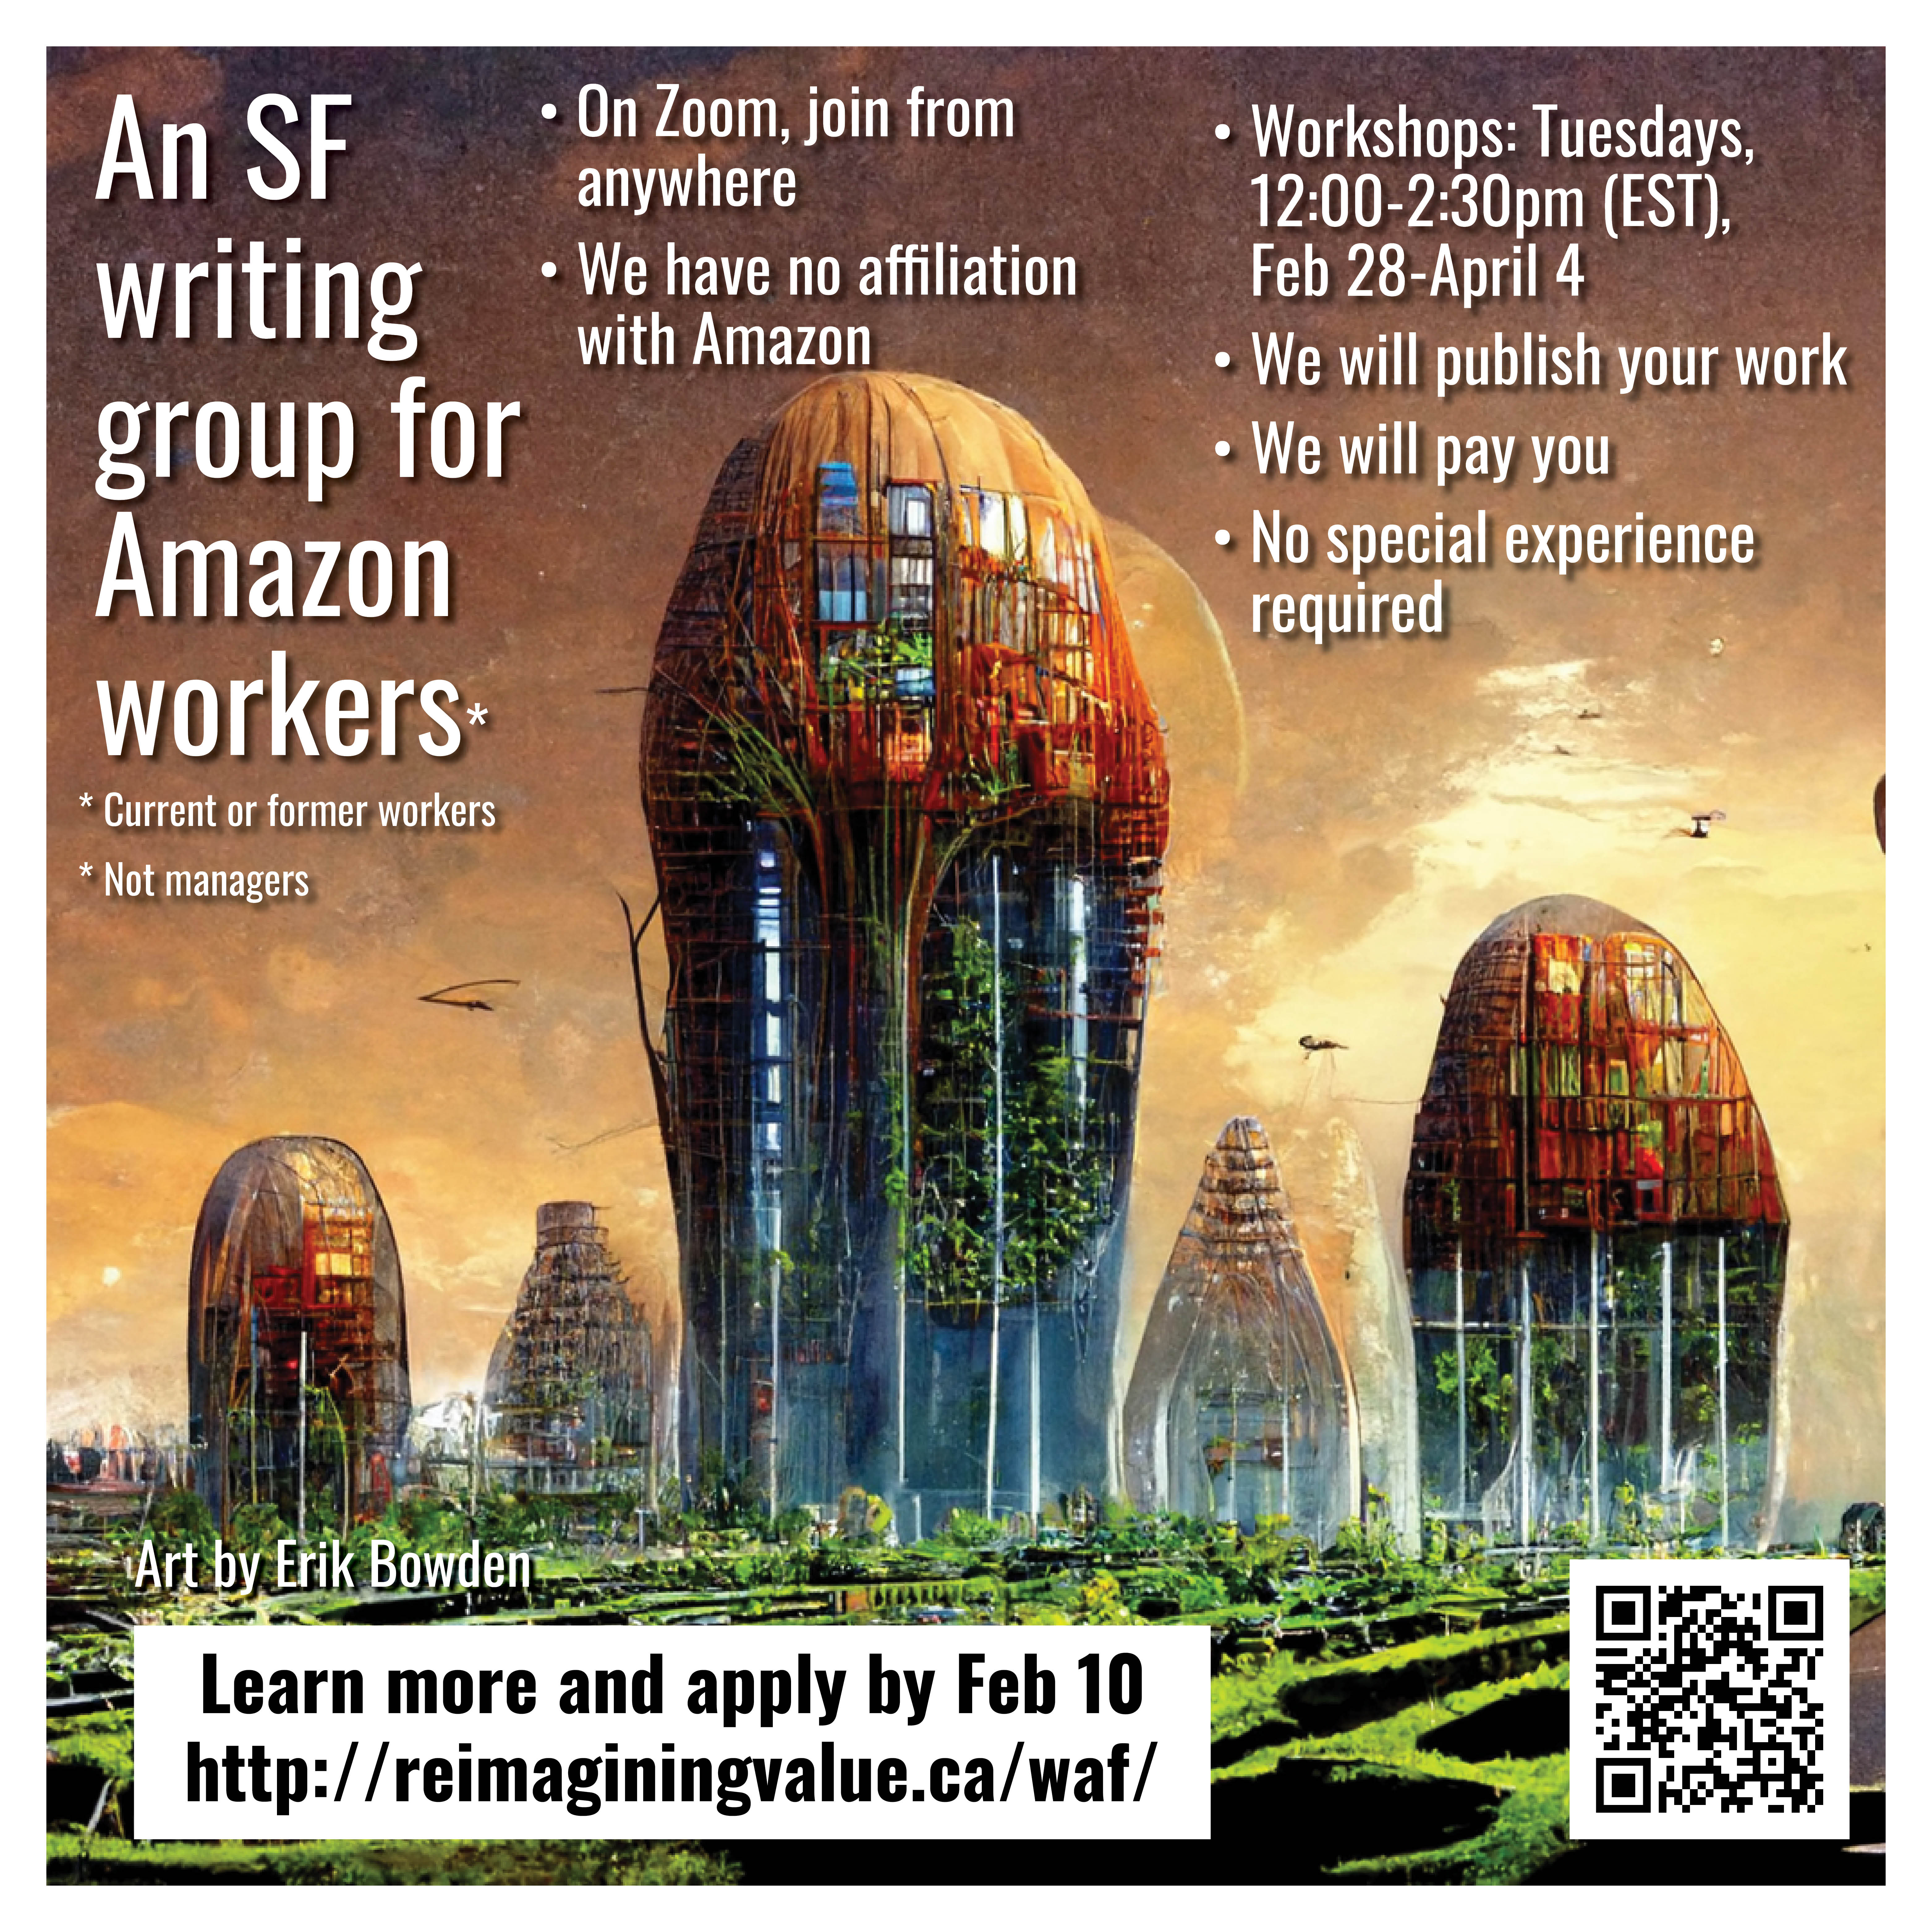 Launching: Worker as Futurist, an SF group for Amazon workers